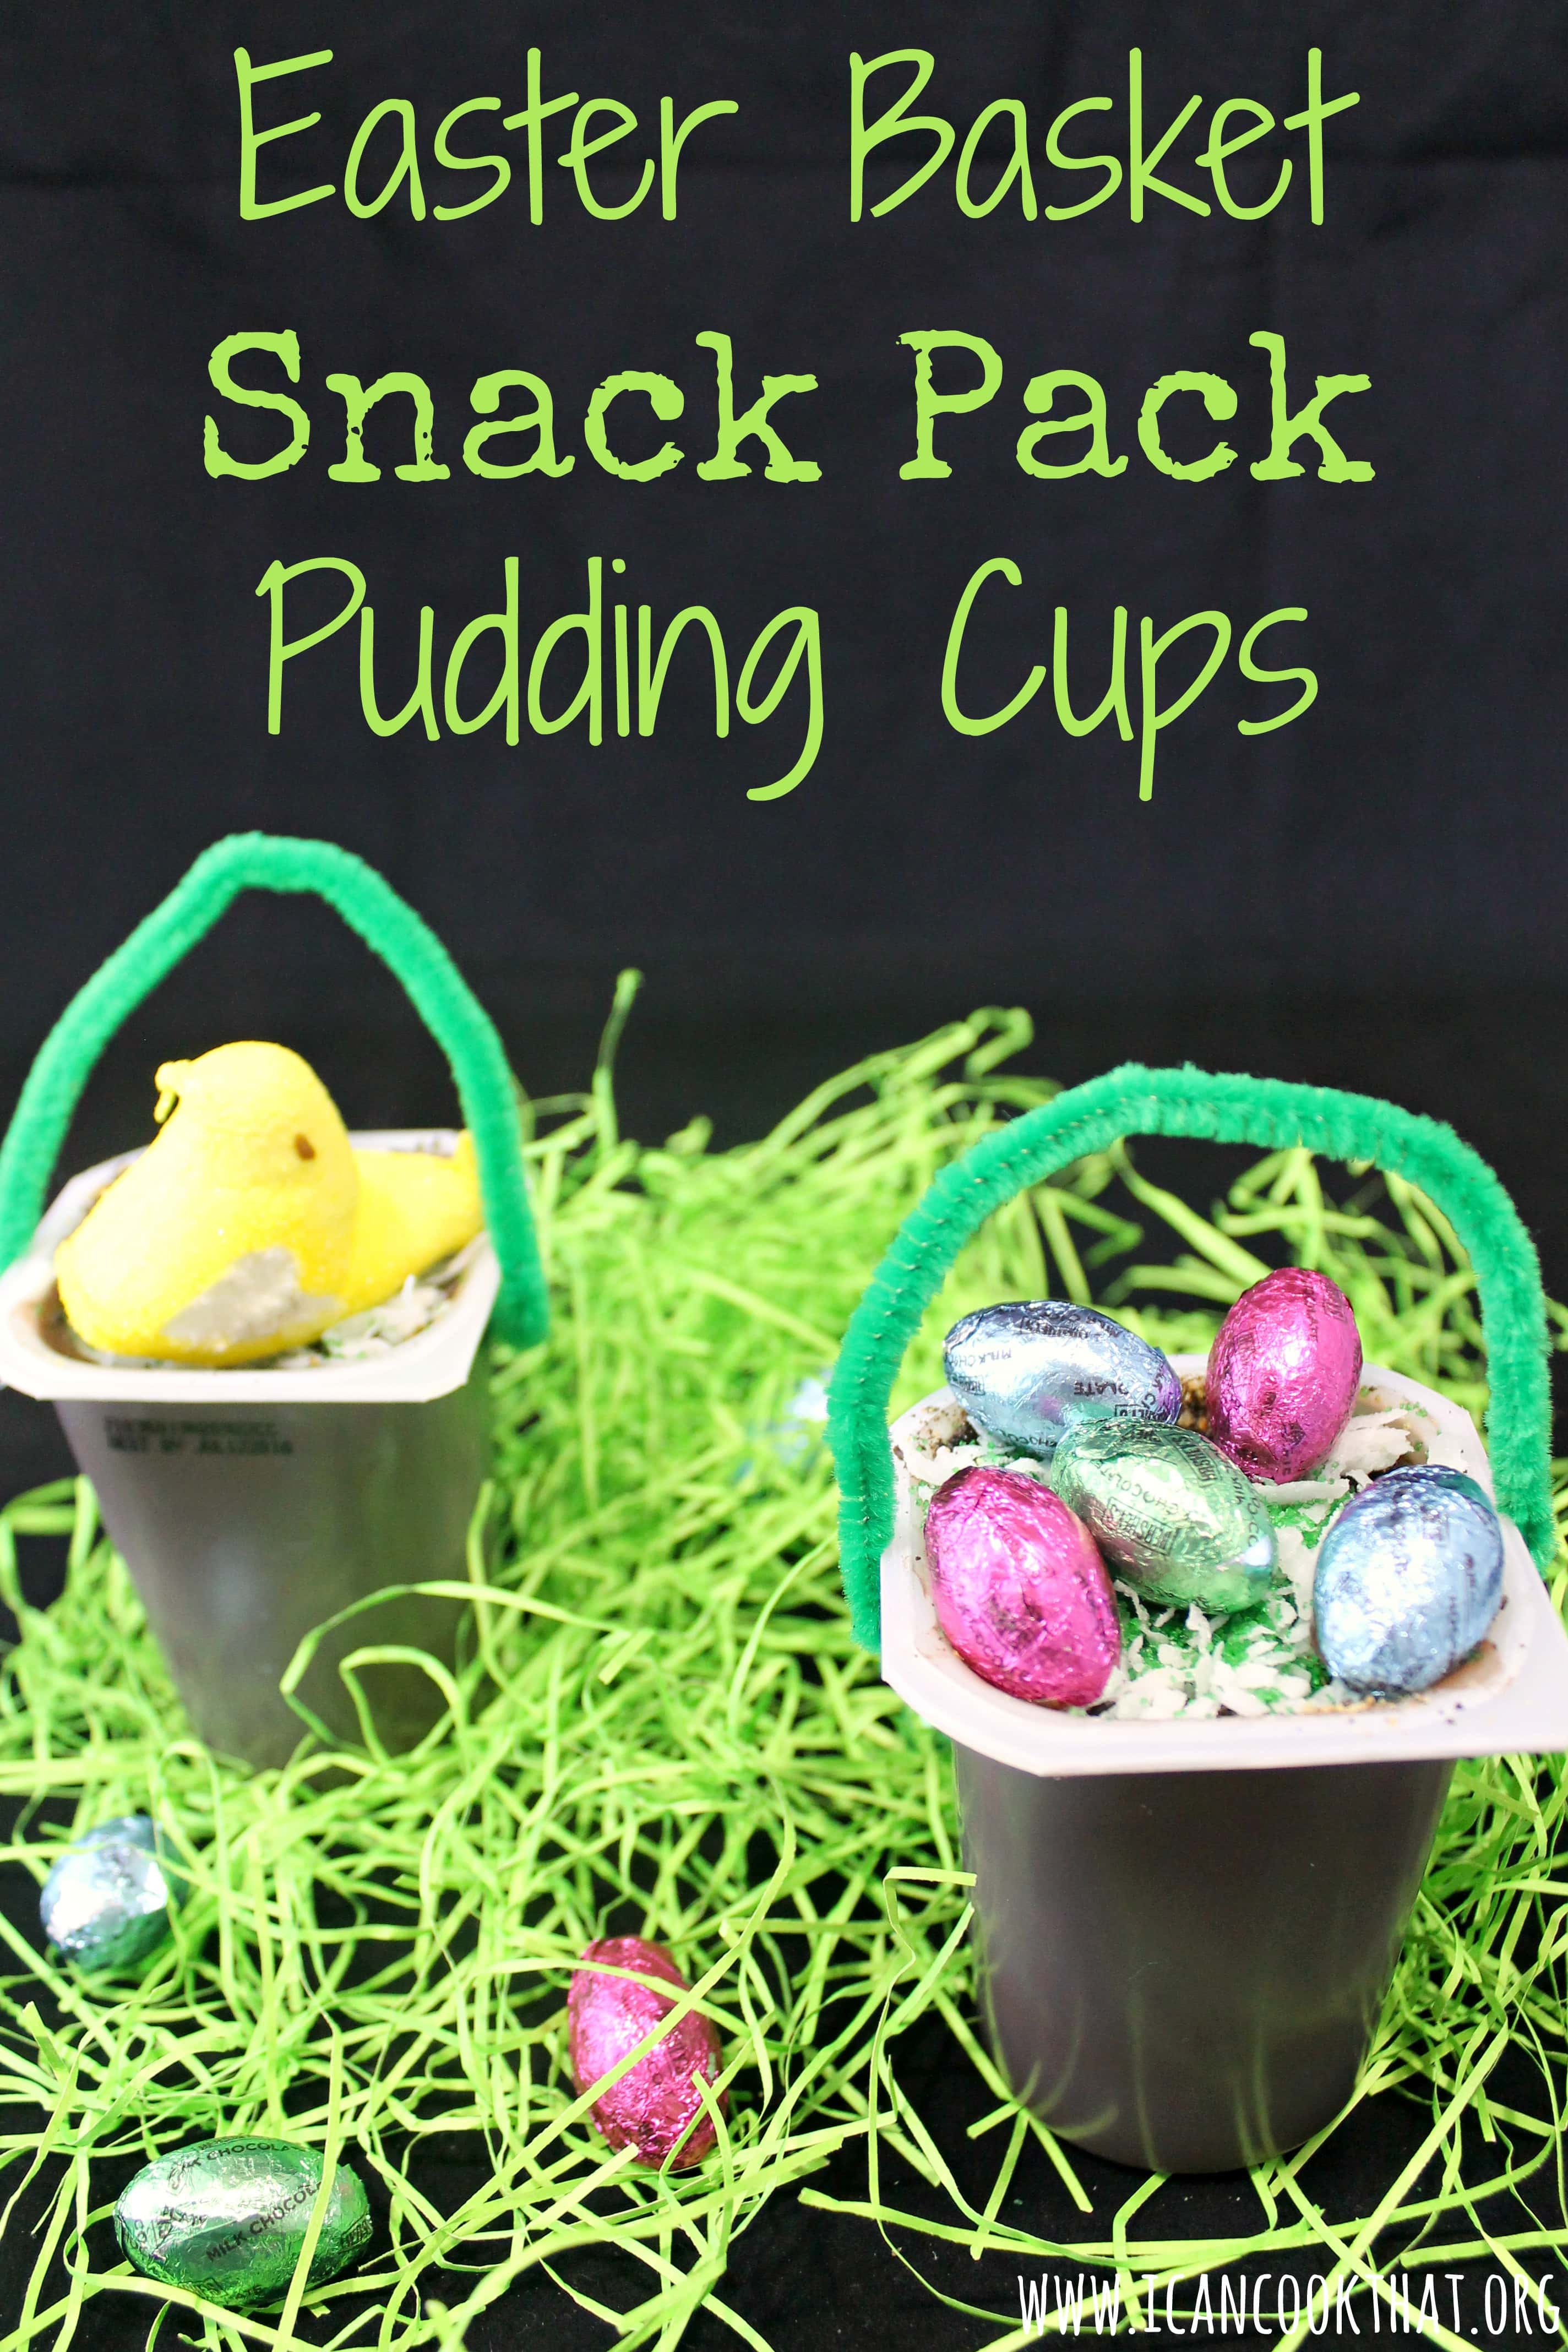 Easter Basket Snack Pack Pudding Cups #SnackPackMixins